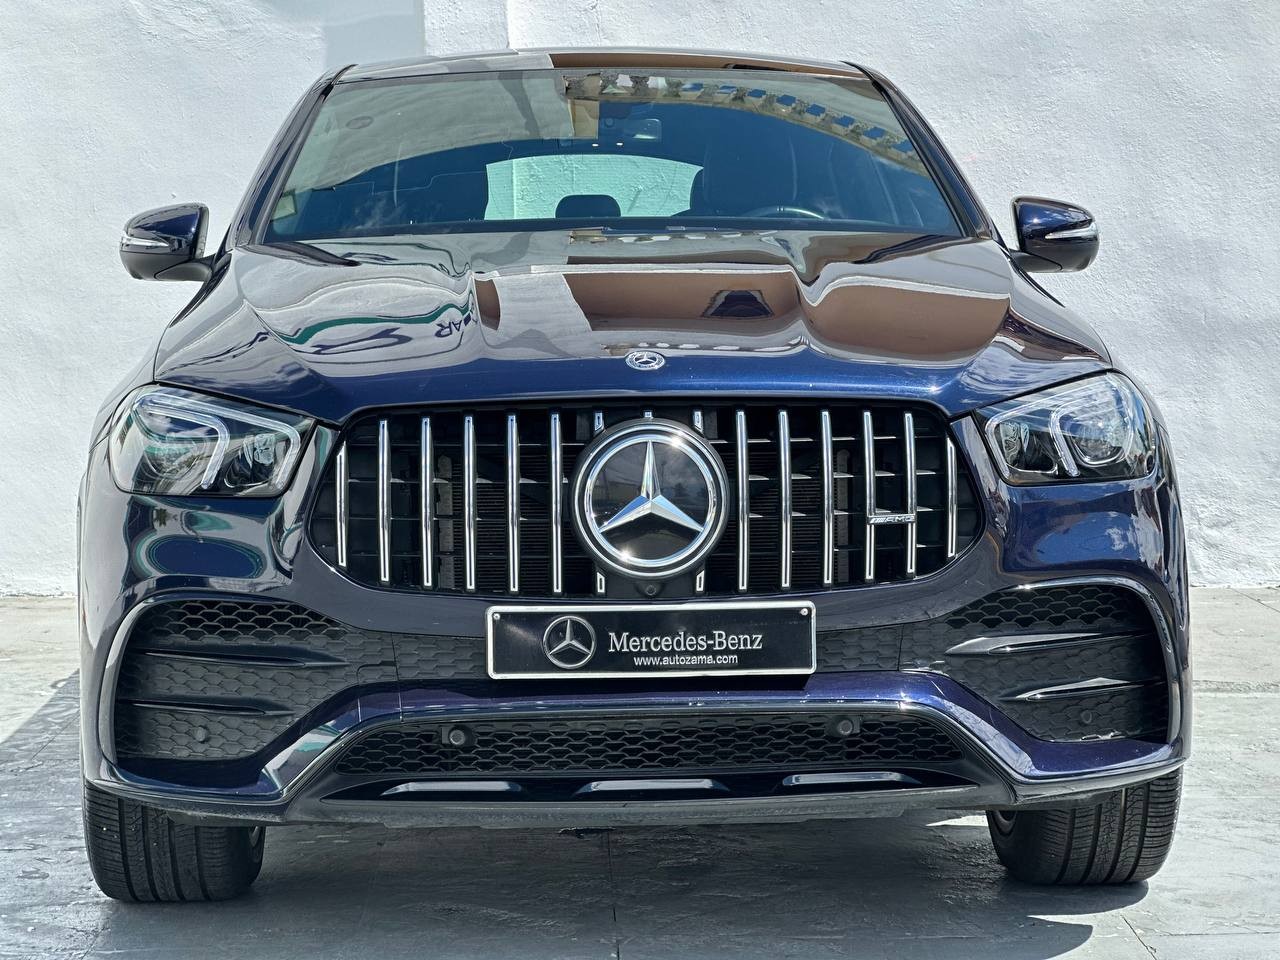 jeepetas y camionetas - MERCEDES-BENZ CLASE GLE 53 4MATIC COUPE 2020 9